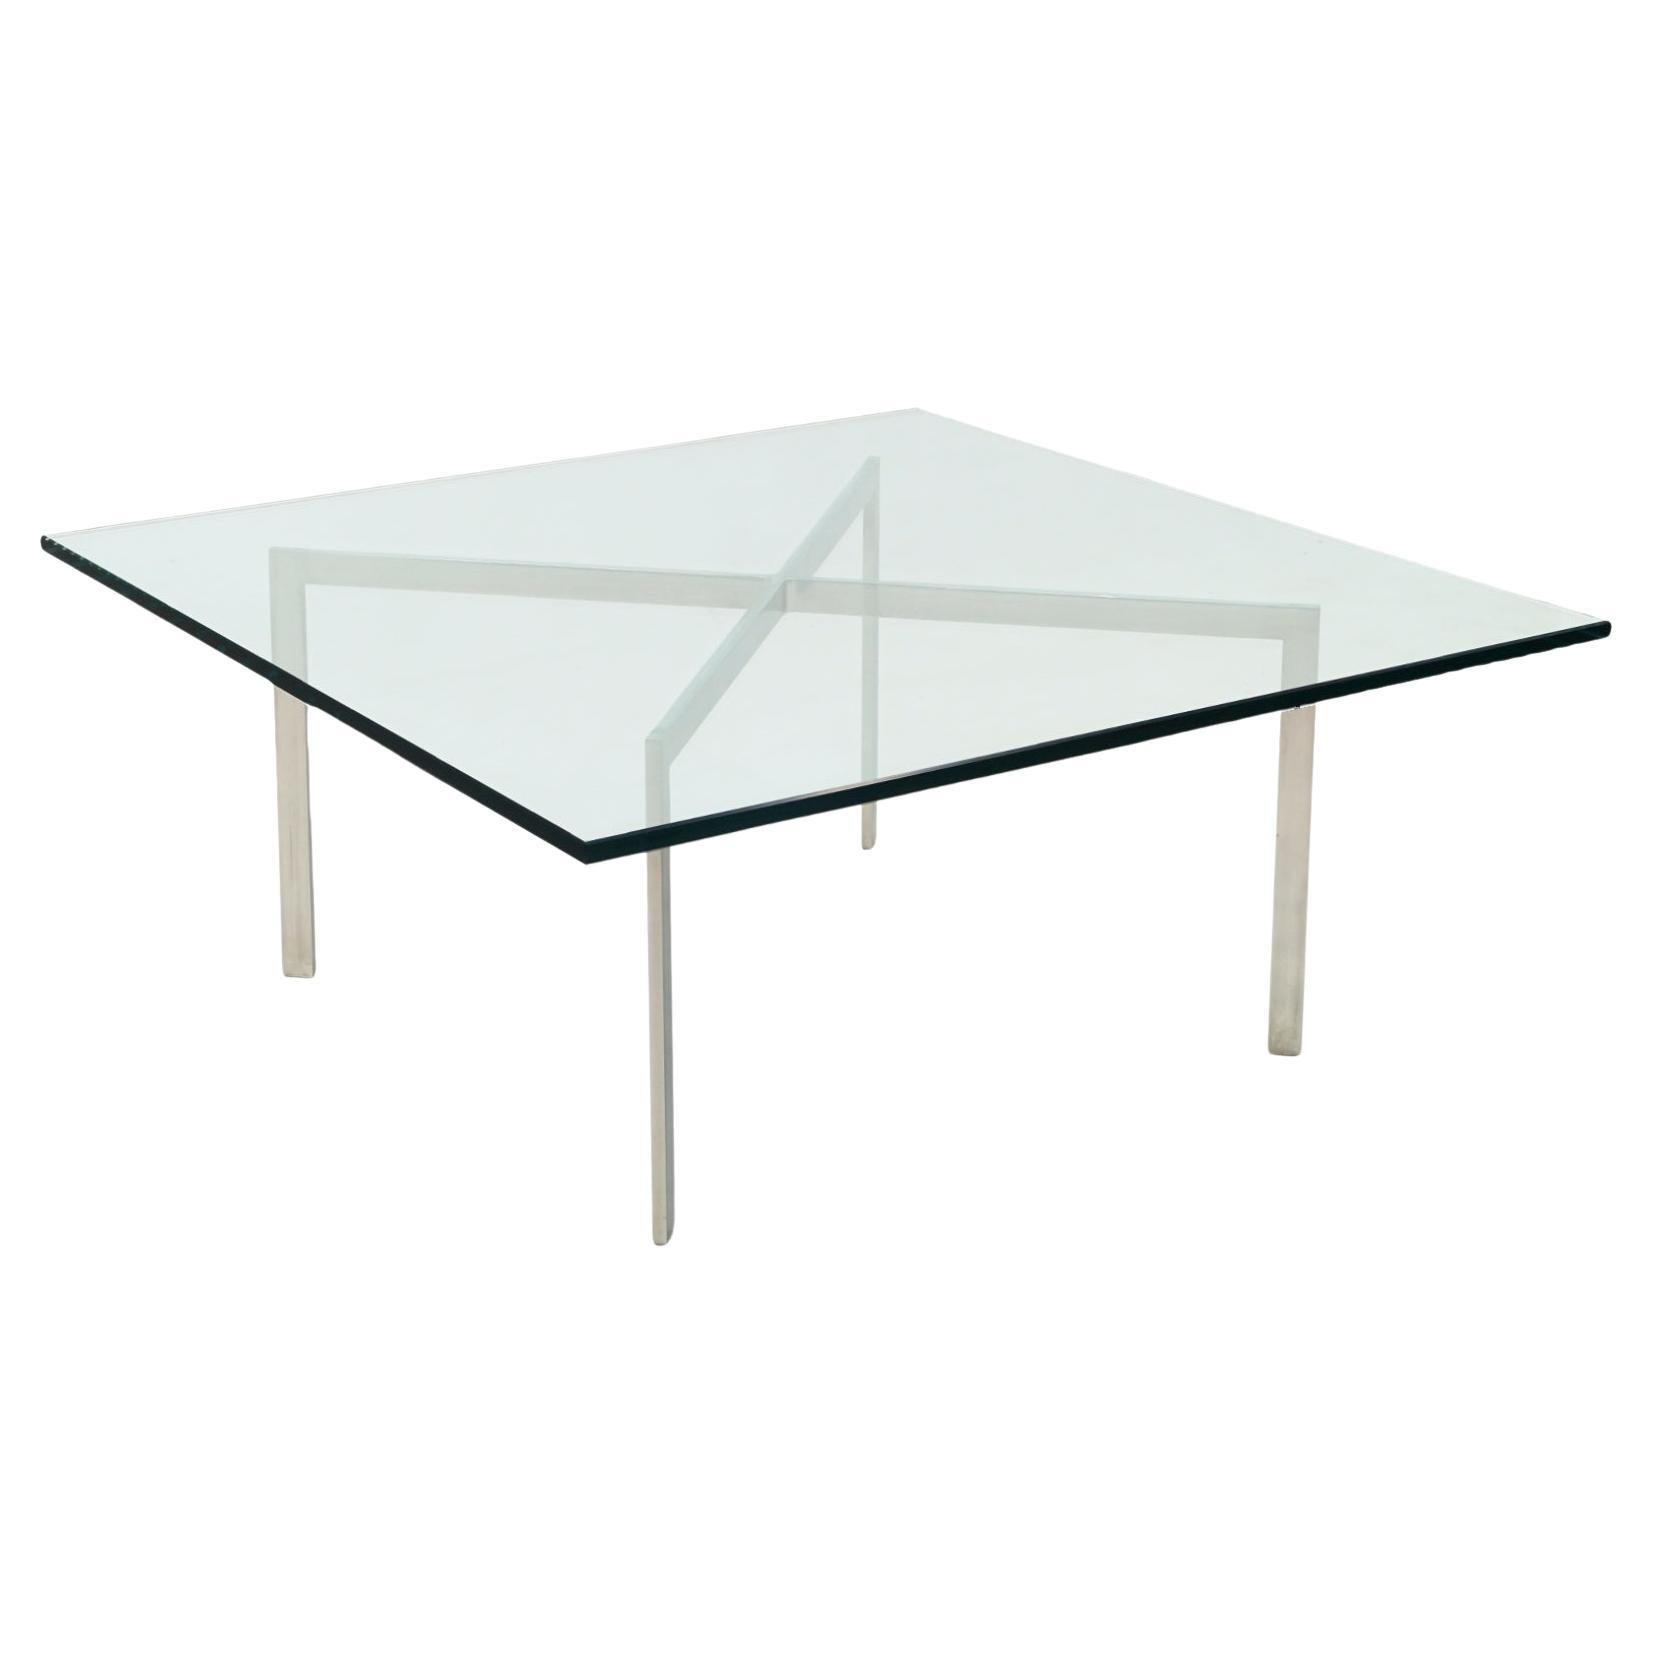 Barcelona Coffee Table by Mies van der Rohe for Knoll, Early 1960s Production